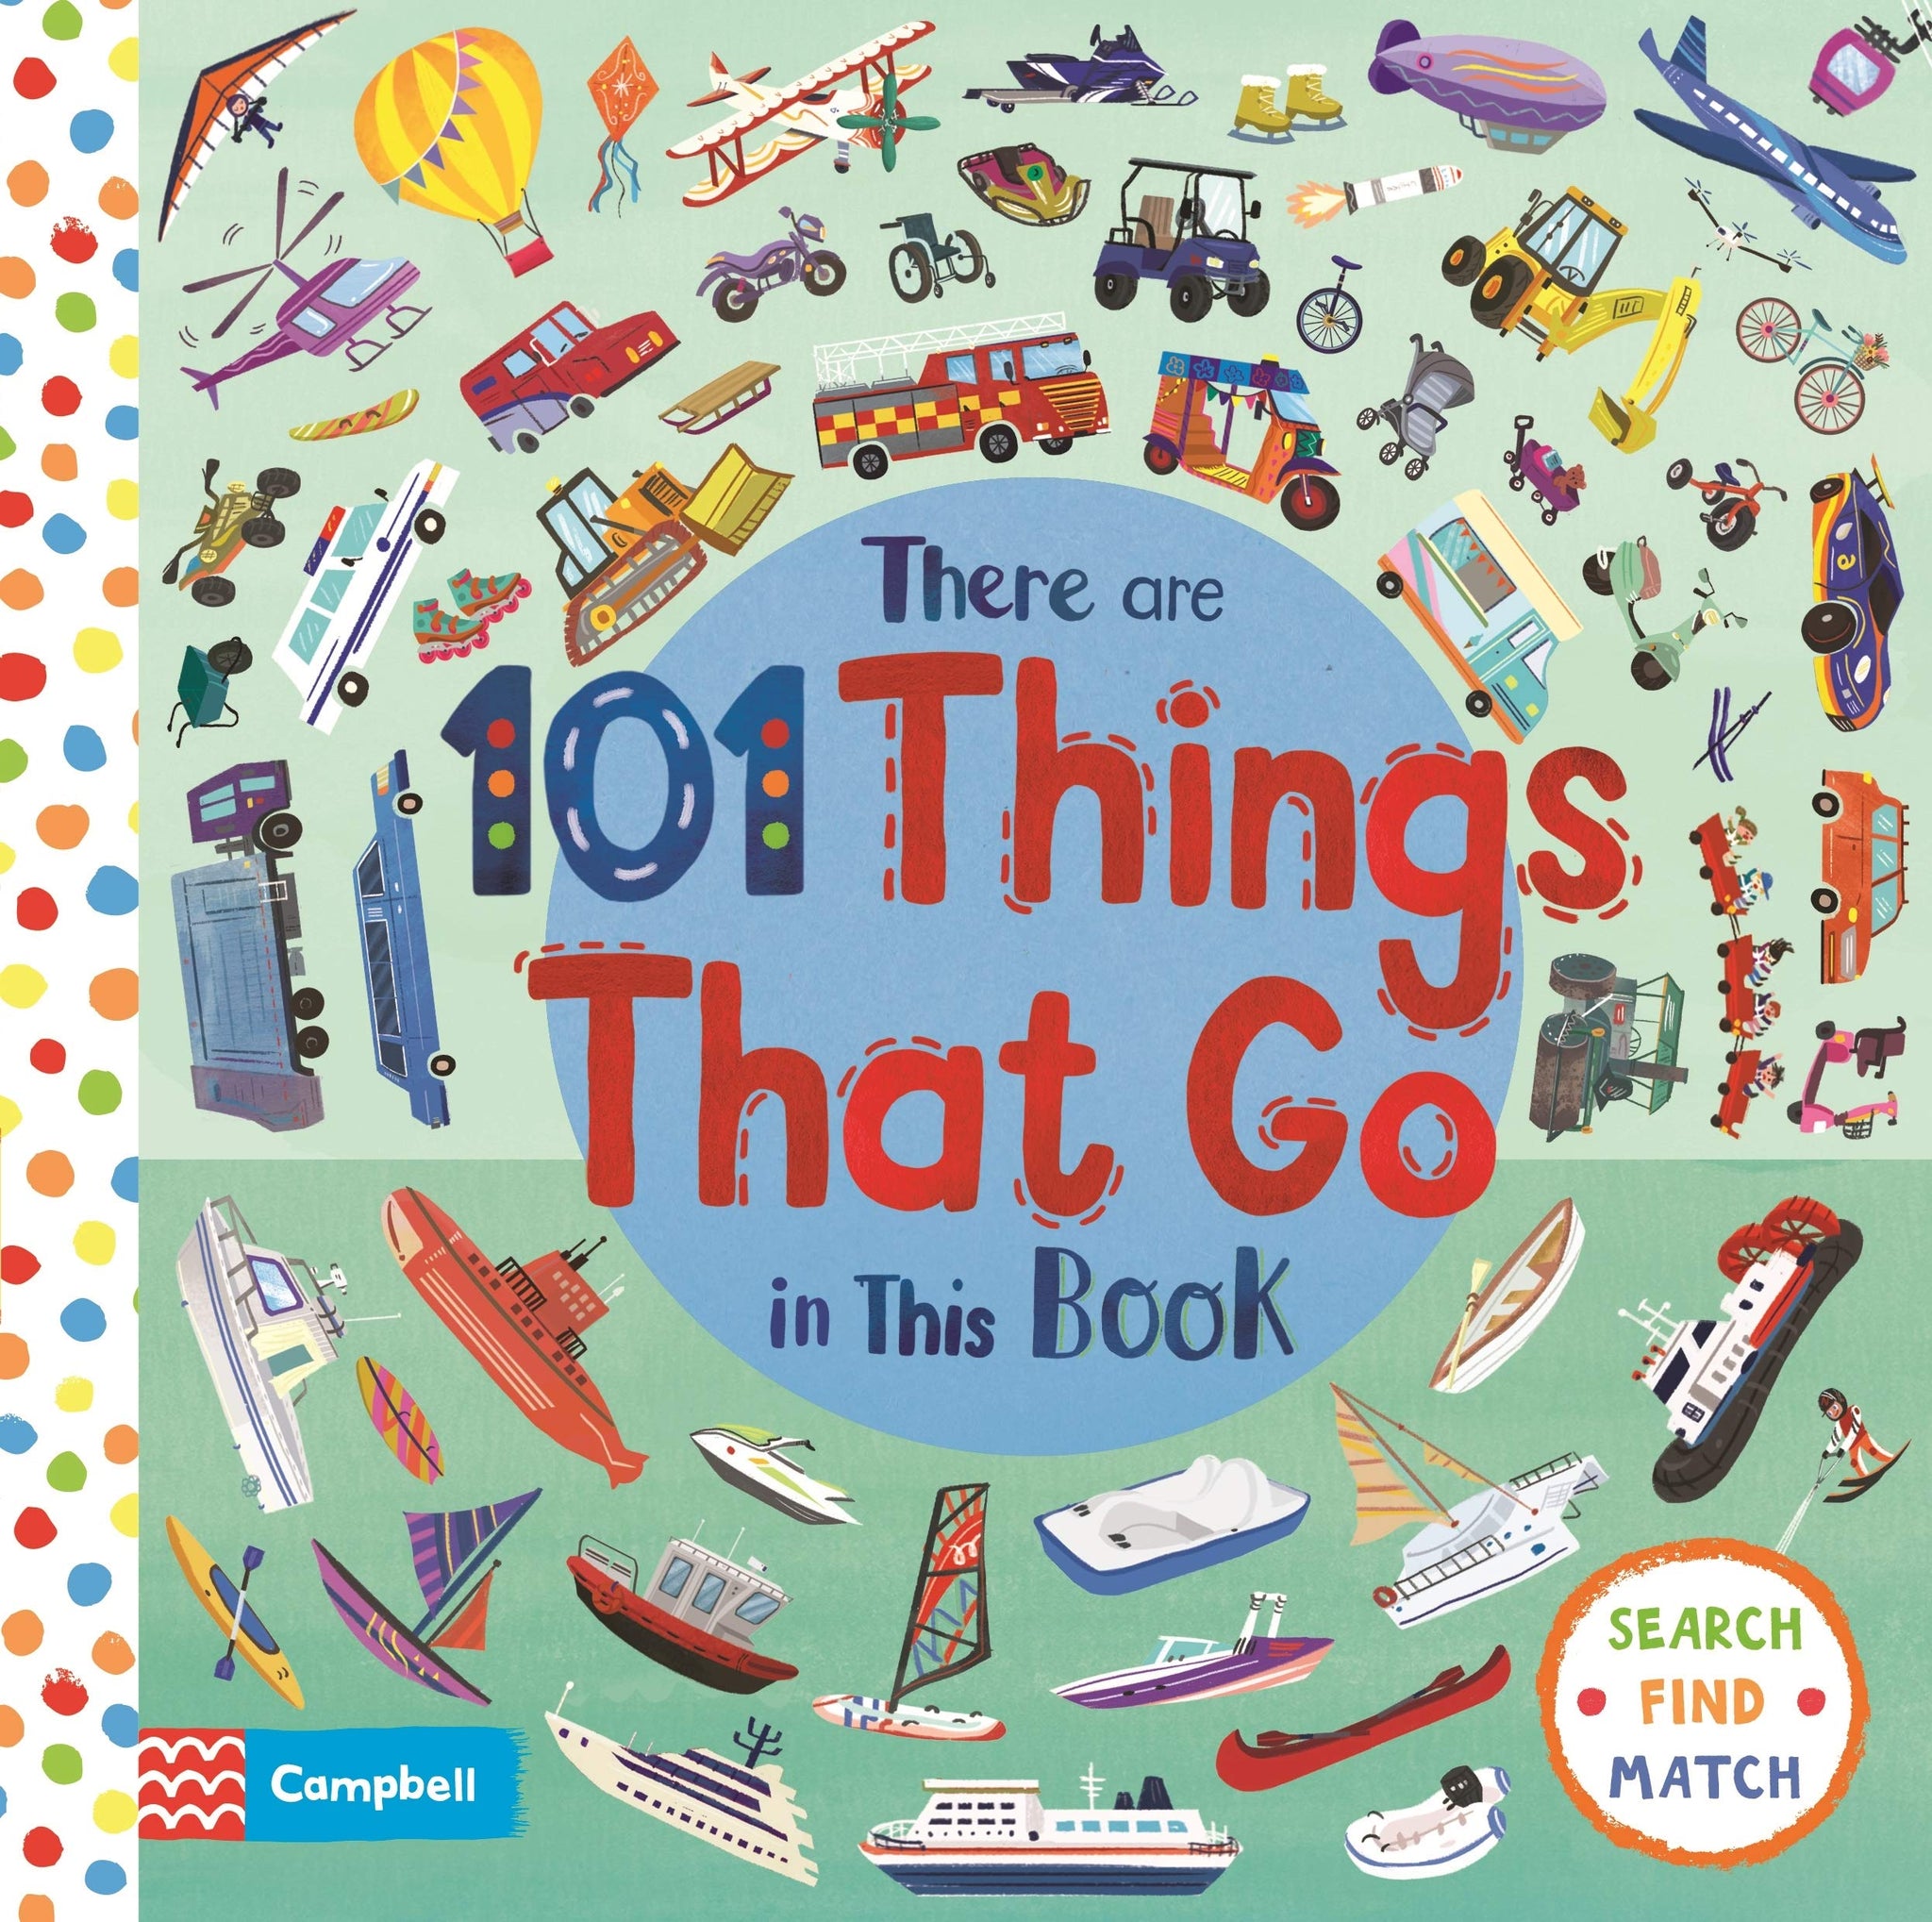 There Are 101 Things That Go In This Book - Board book